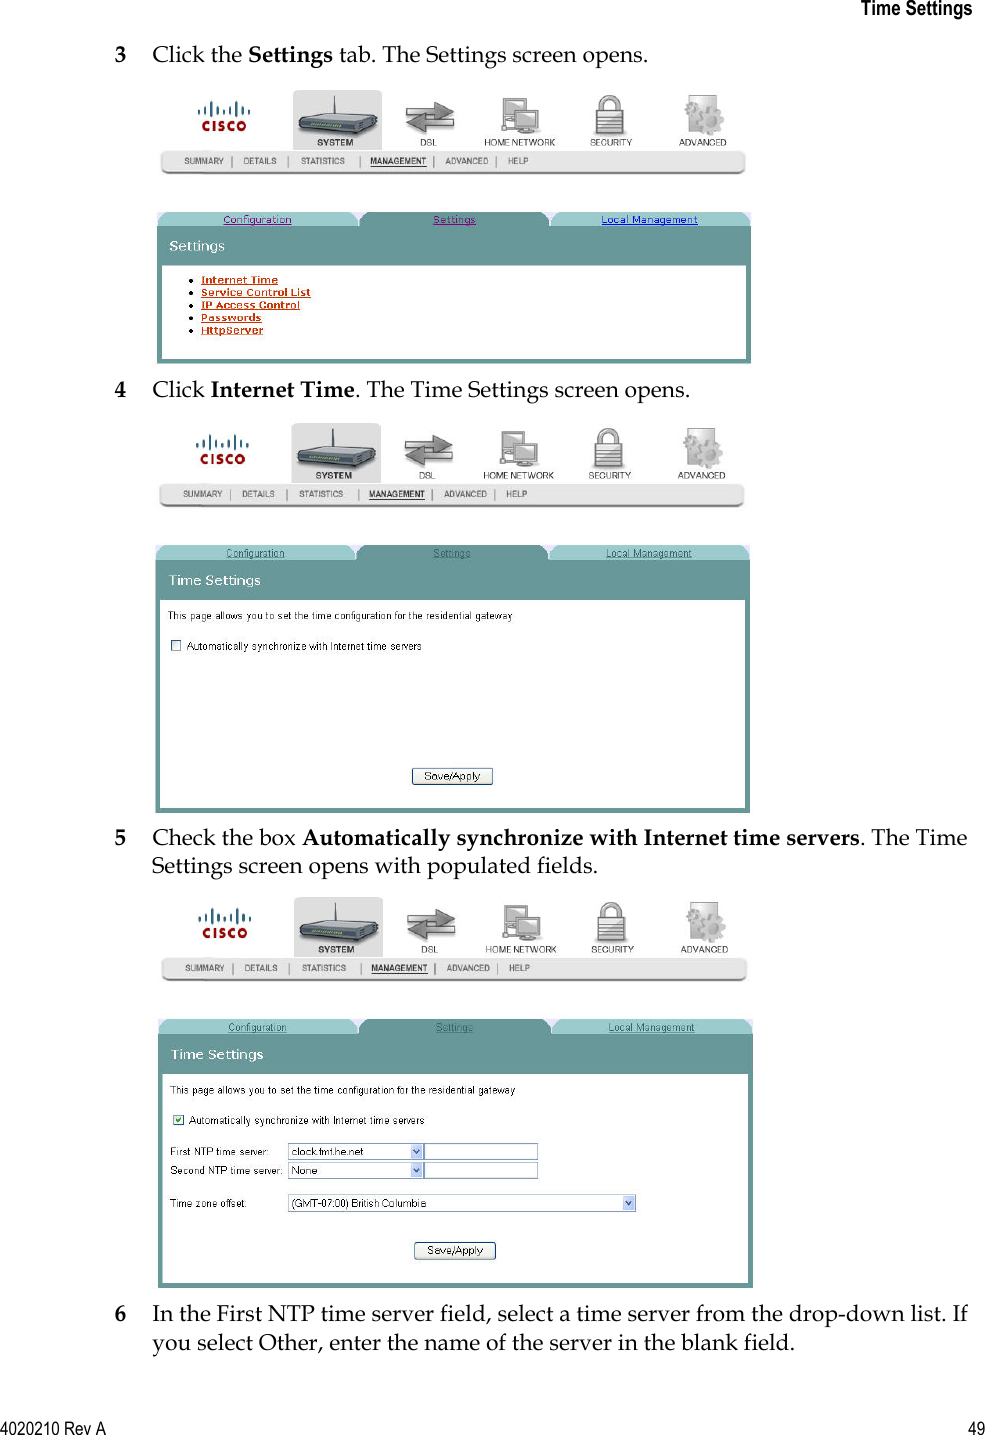   Time Settings 4020210 Rev A 49  3 Click the Settings tab. The Settings screen opens.  4 Click Internet Time. The Time Settings screen opens.  5 Check the box Automatically synchronize with Internet time servers. The Time Settings screen opens with populated fields.  6 In the First NTP time server field, select a time server from the drop-down list. If you select Other, enter the name of the server in the blank field. 